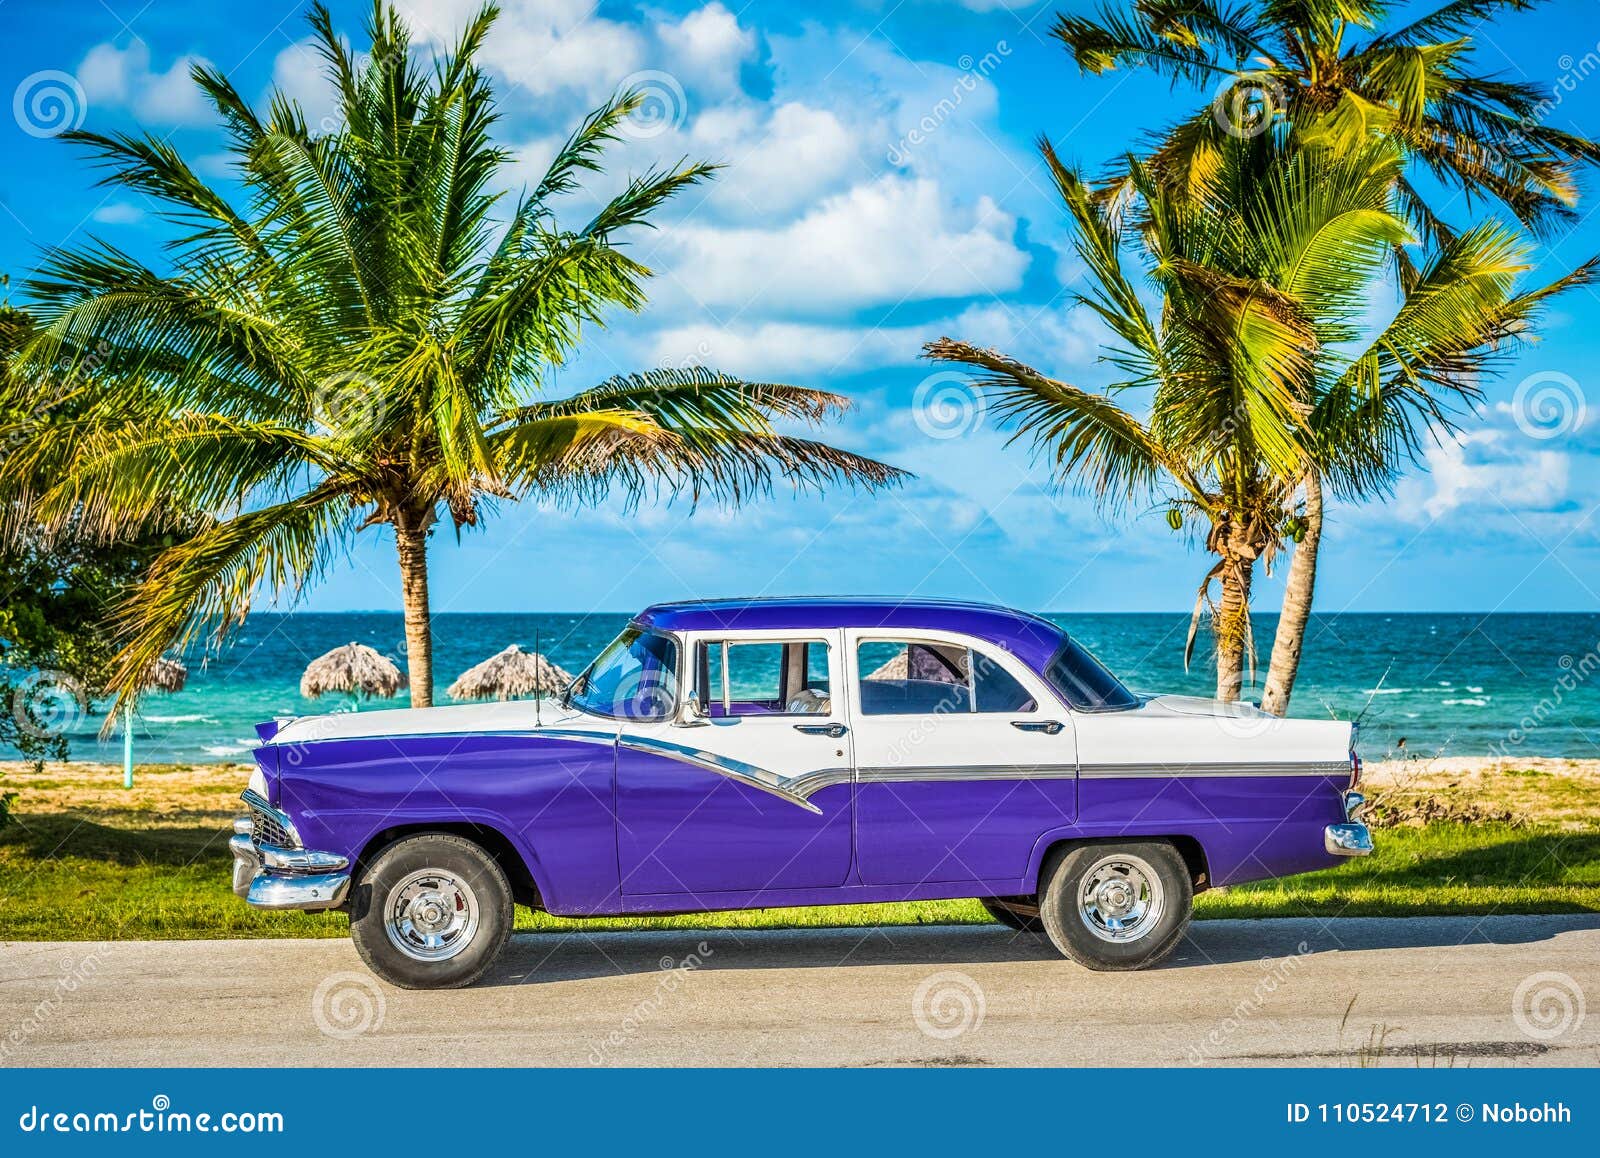 hdr - parked american white blue vintage car in the front-side view on the beach in havana cuba - serie cuba reportage